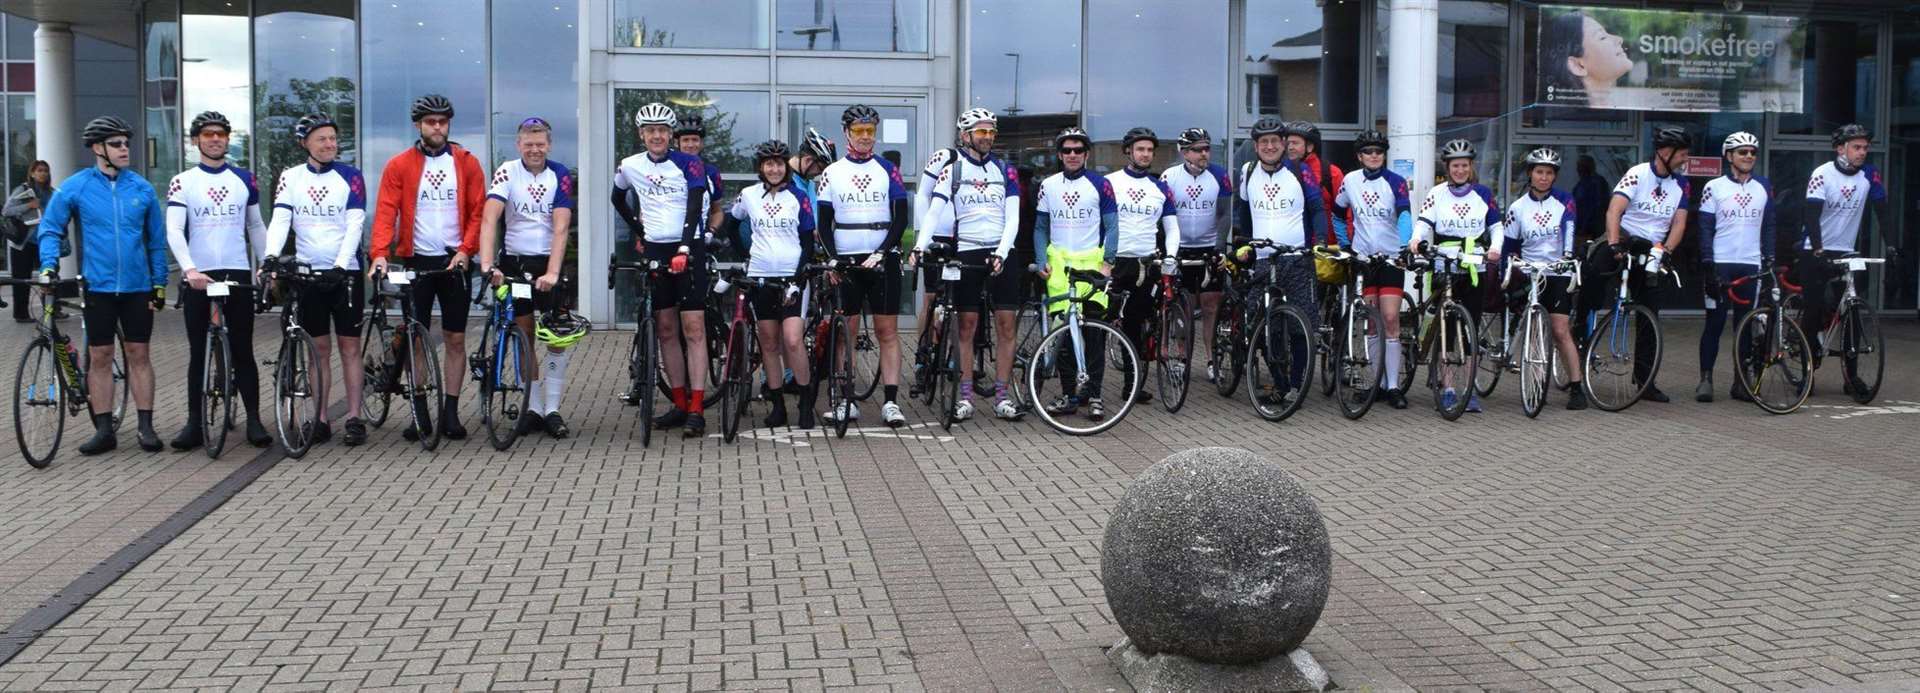 Ride4Life fundraisers get ready for their epic journey to raise money for Darent Valley Hospital